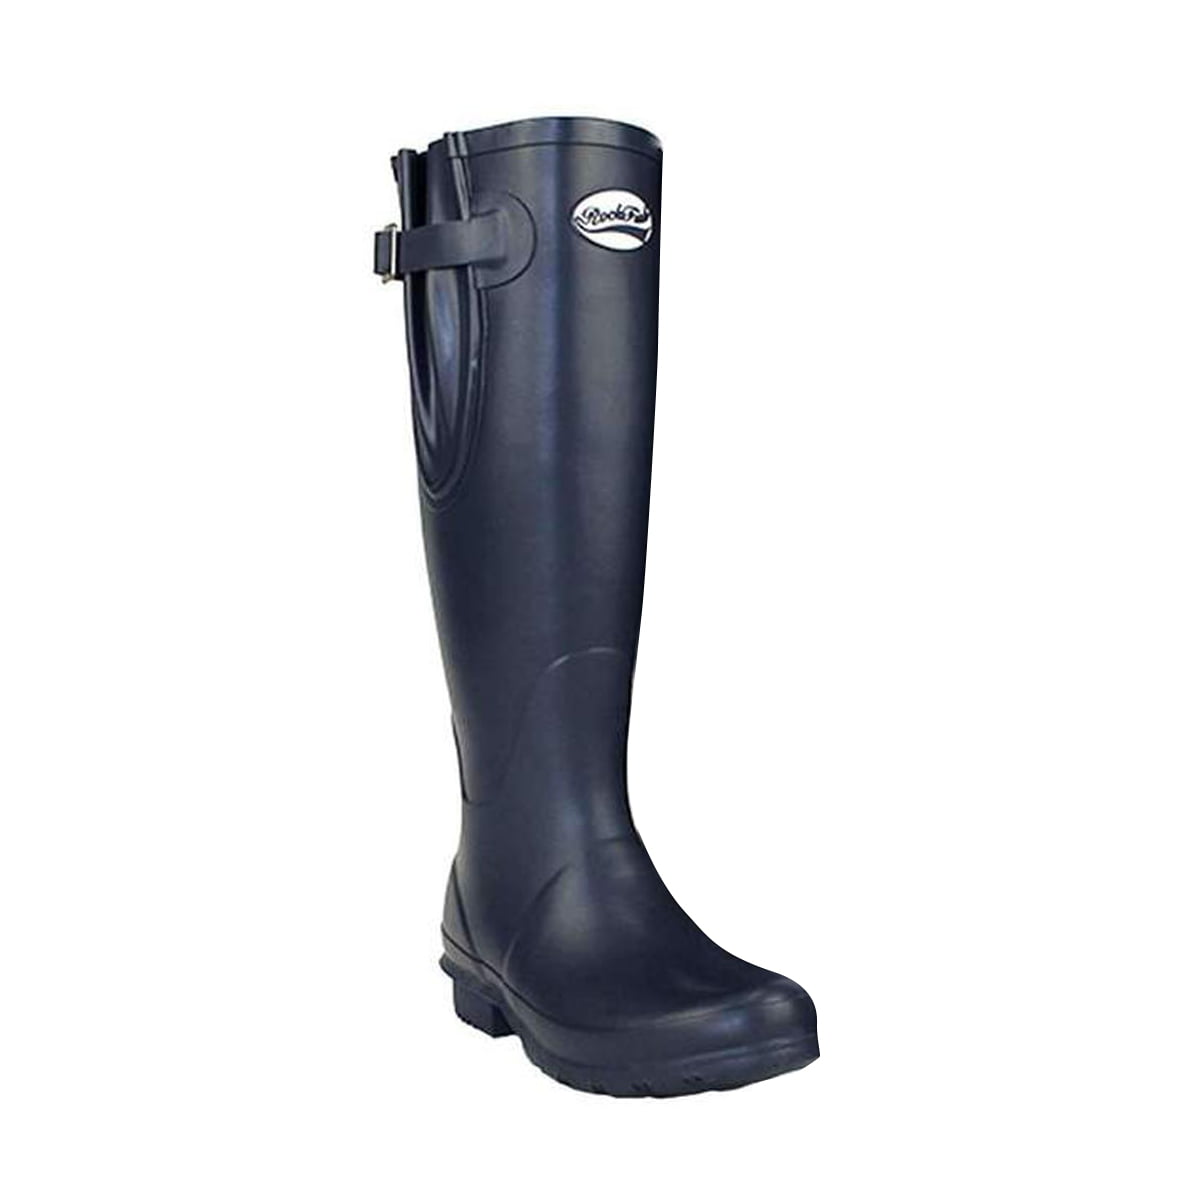 Rockfish Women's Wellies Gloss 'Our Navy' Blue Ladies Wellingtons CLEARANCE SALE 